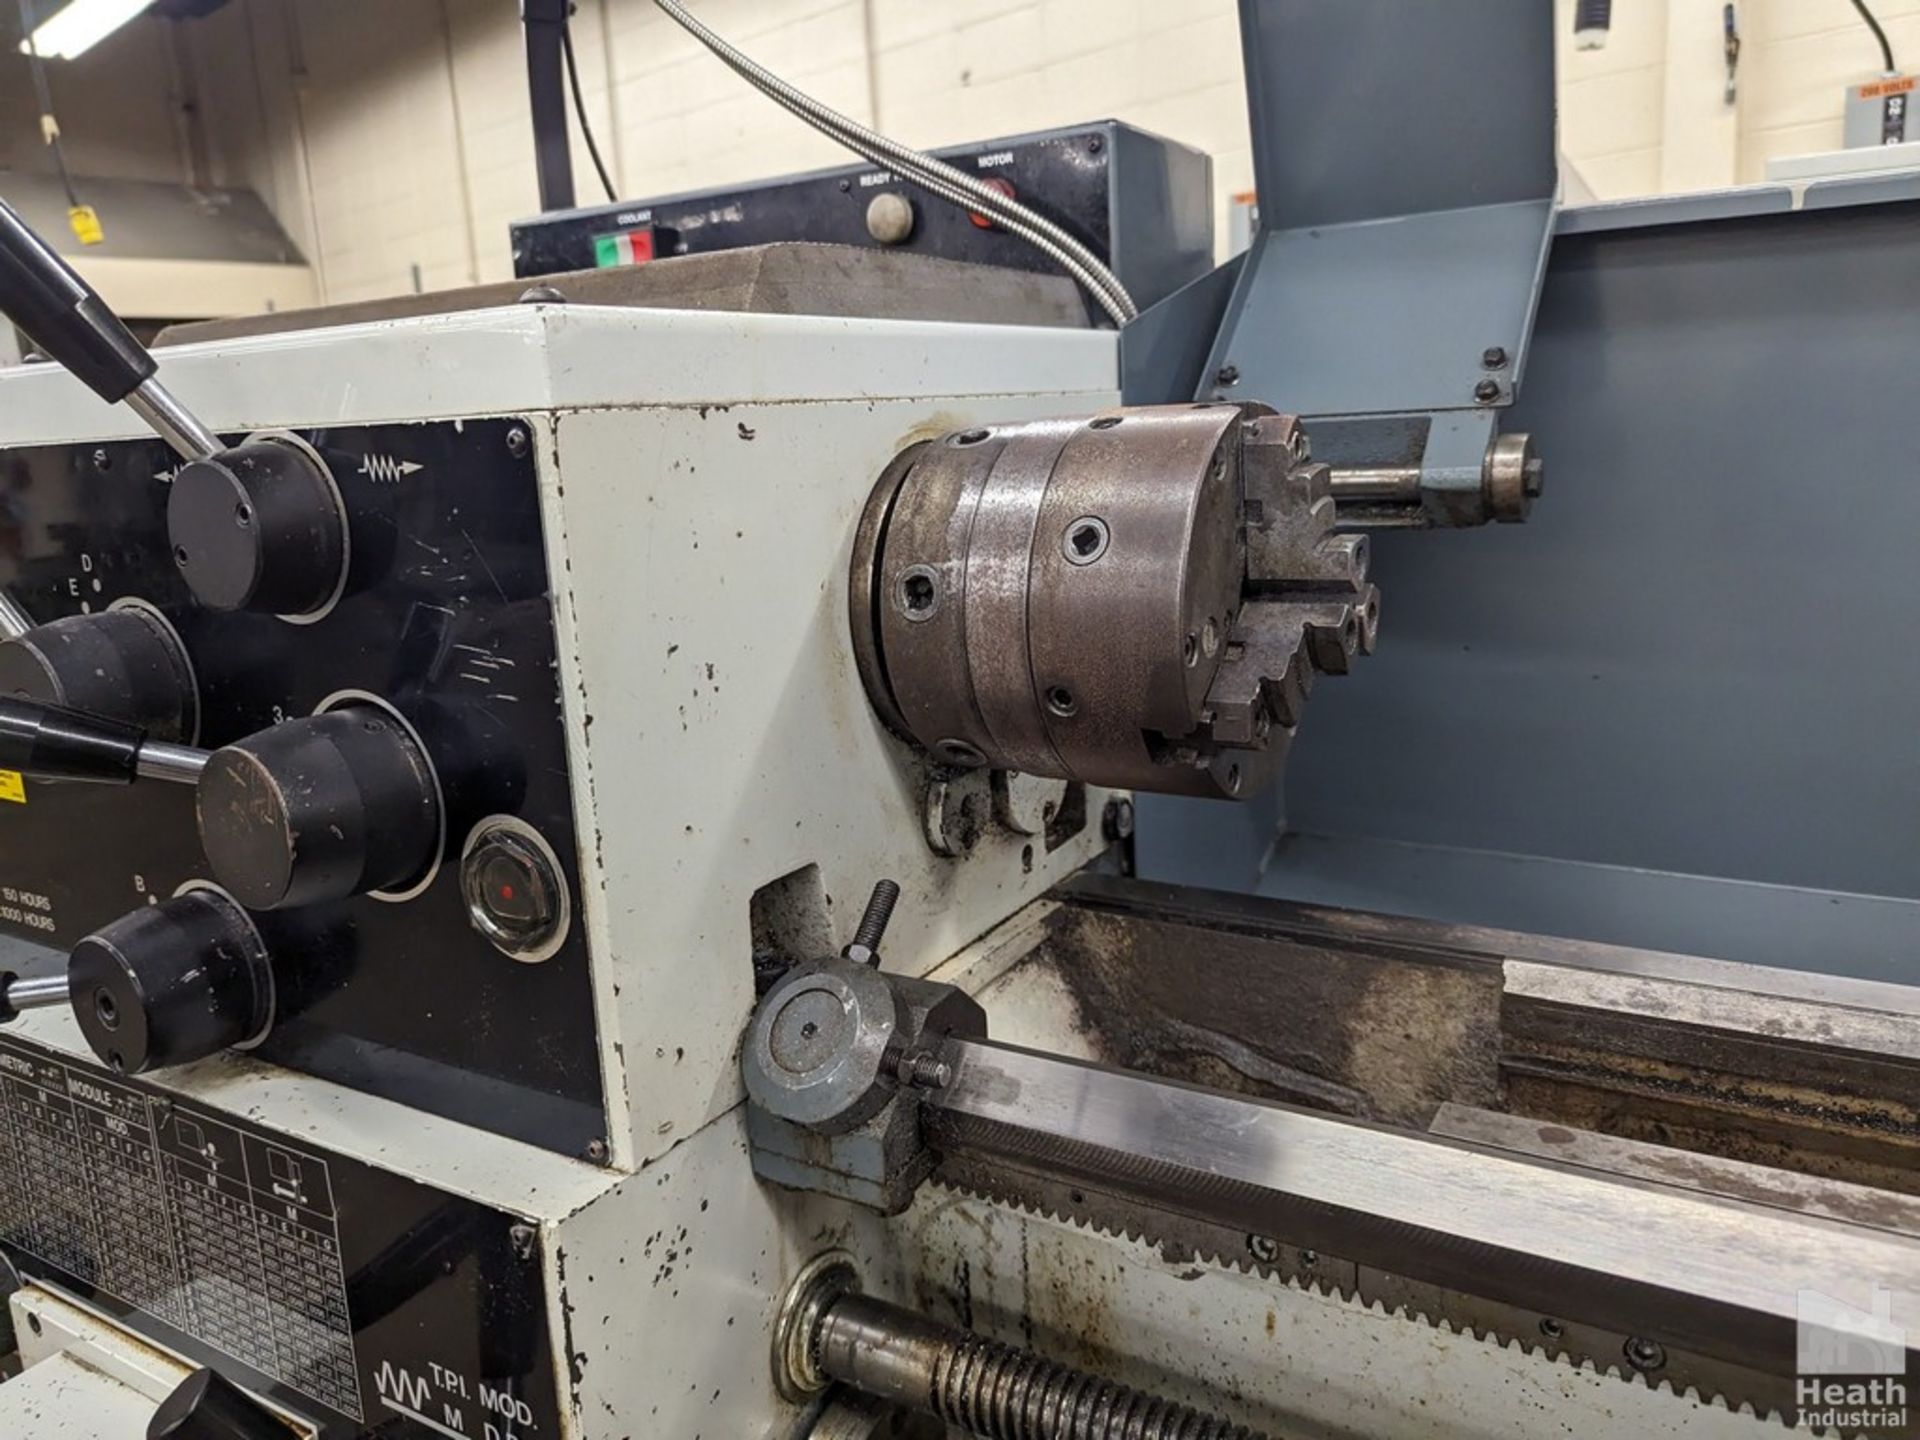 CLAUSING-METOSA 13"X40" MODEL 1340S TOOLROOM LATHE, S/N 41538, 2500 SPINDLE RPM, WITH TAPER - Image 5 of 7